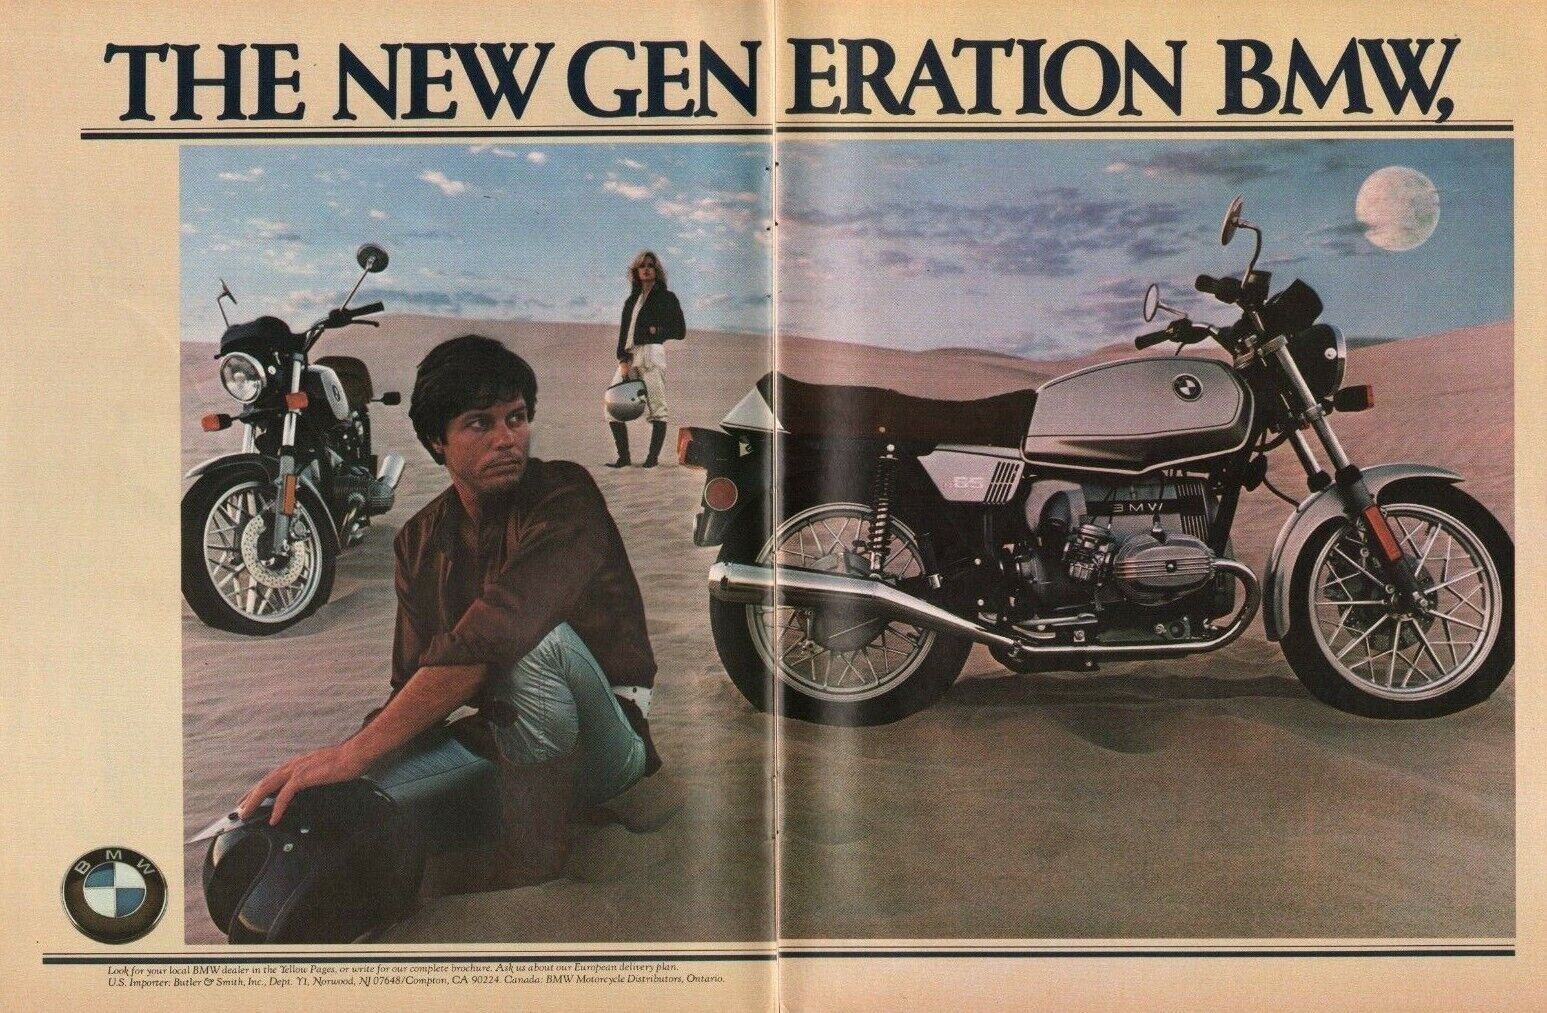 1979 BMW R65 - 2-Page Vintage Motorcycle Ad